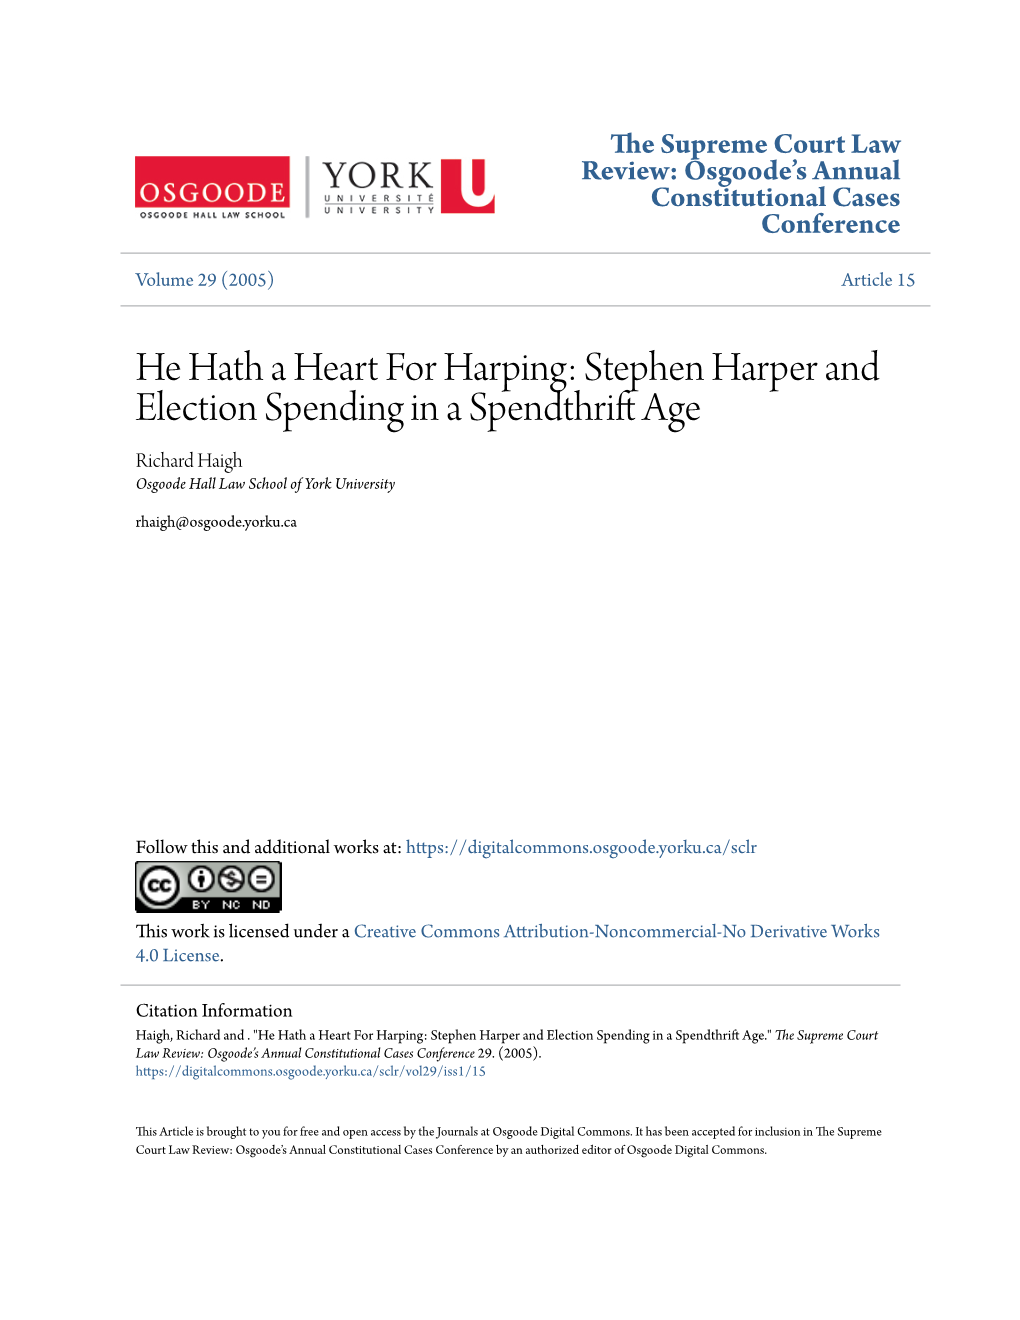 Stephen Harper and Election Spending in a Spendthrift Age Richard Haigh Osgoode Hall Law School of York University Rhaigh@Osgoode.Yorku.Ca